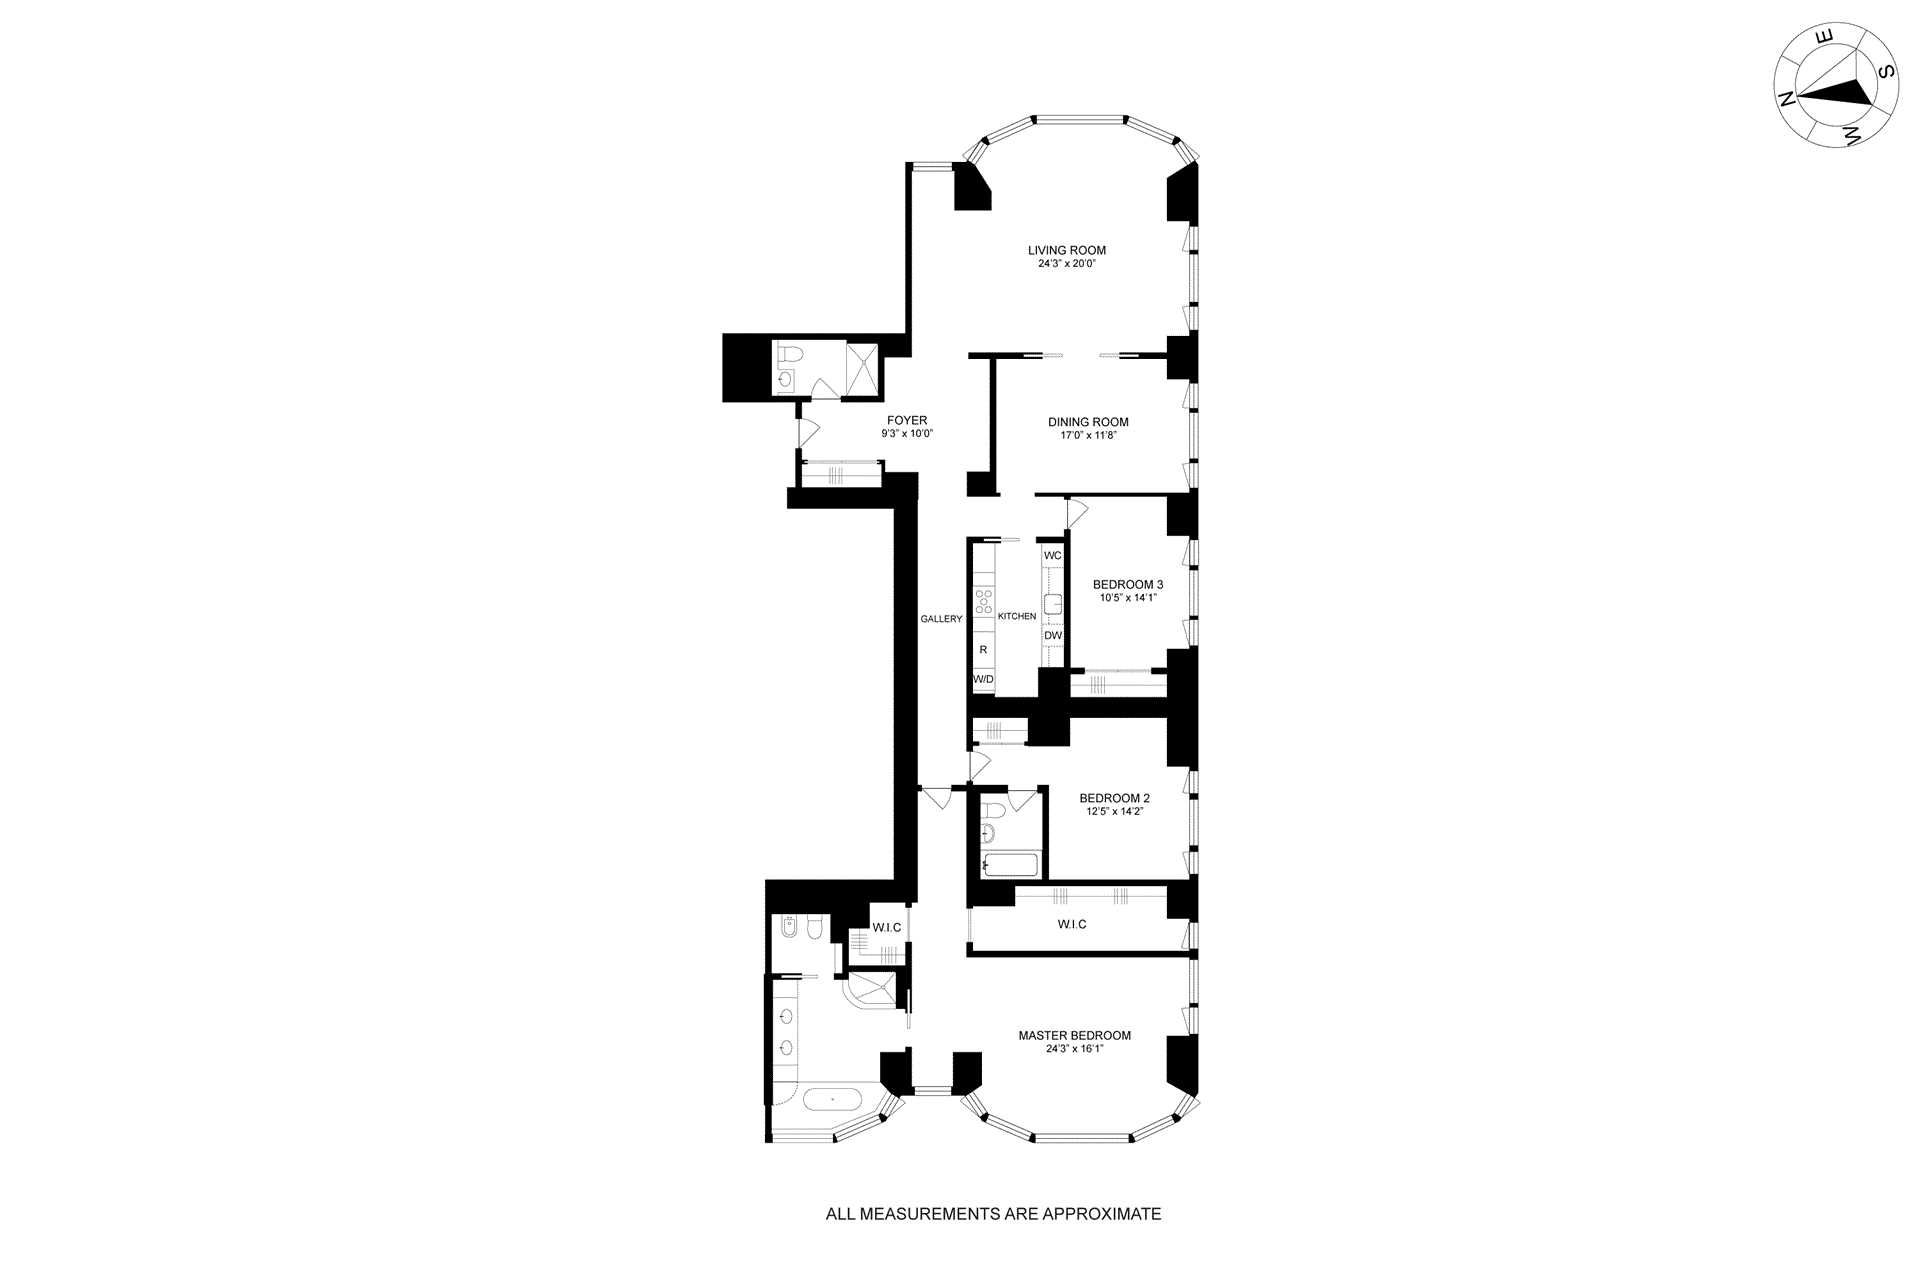 Floorplan for 50 United Nations Plaza, 27A